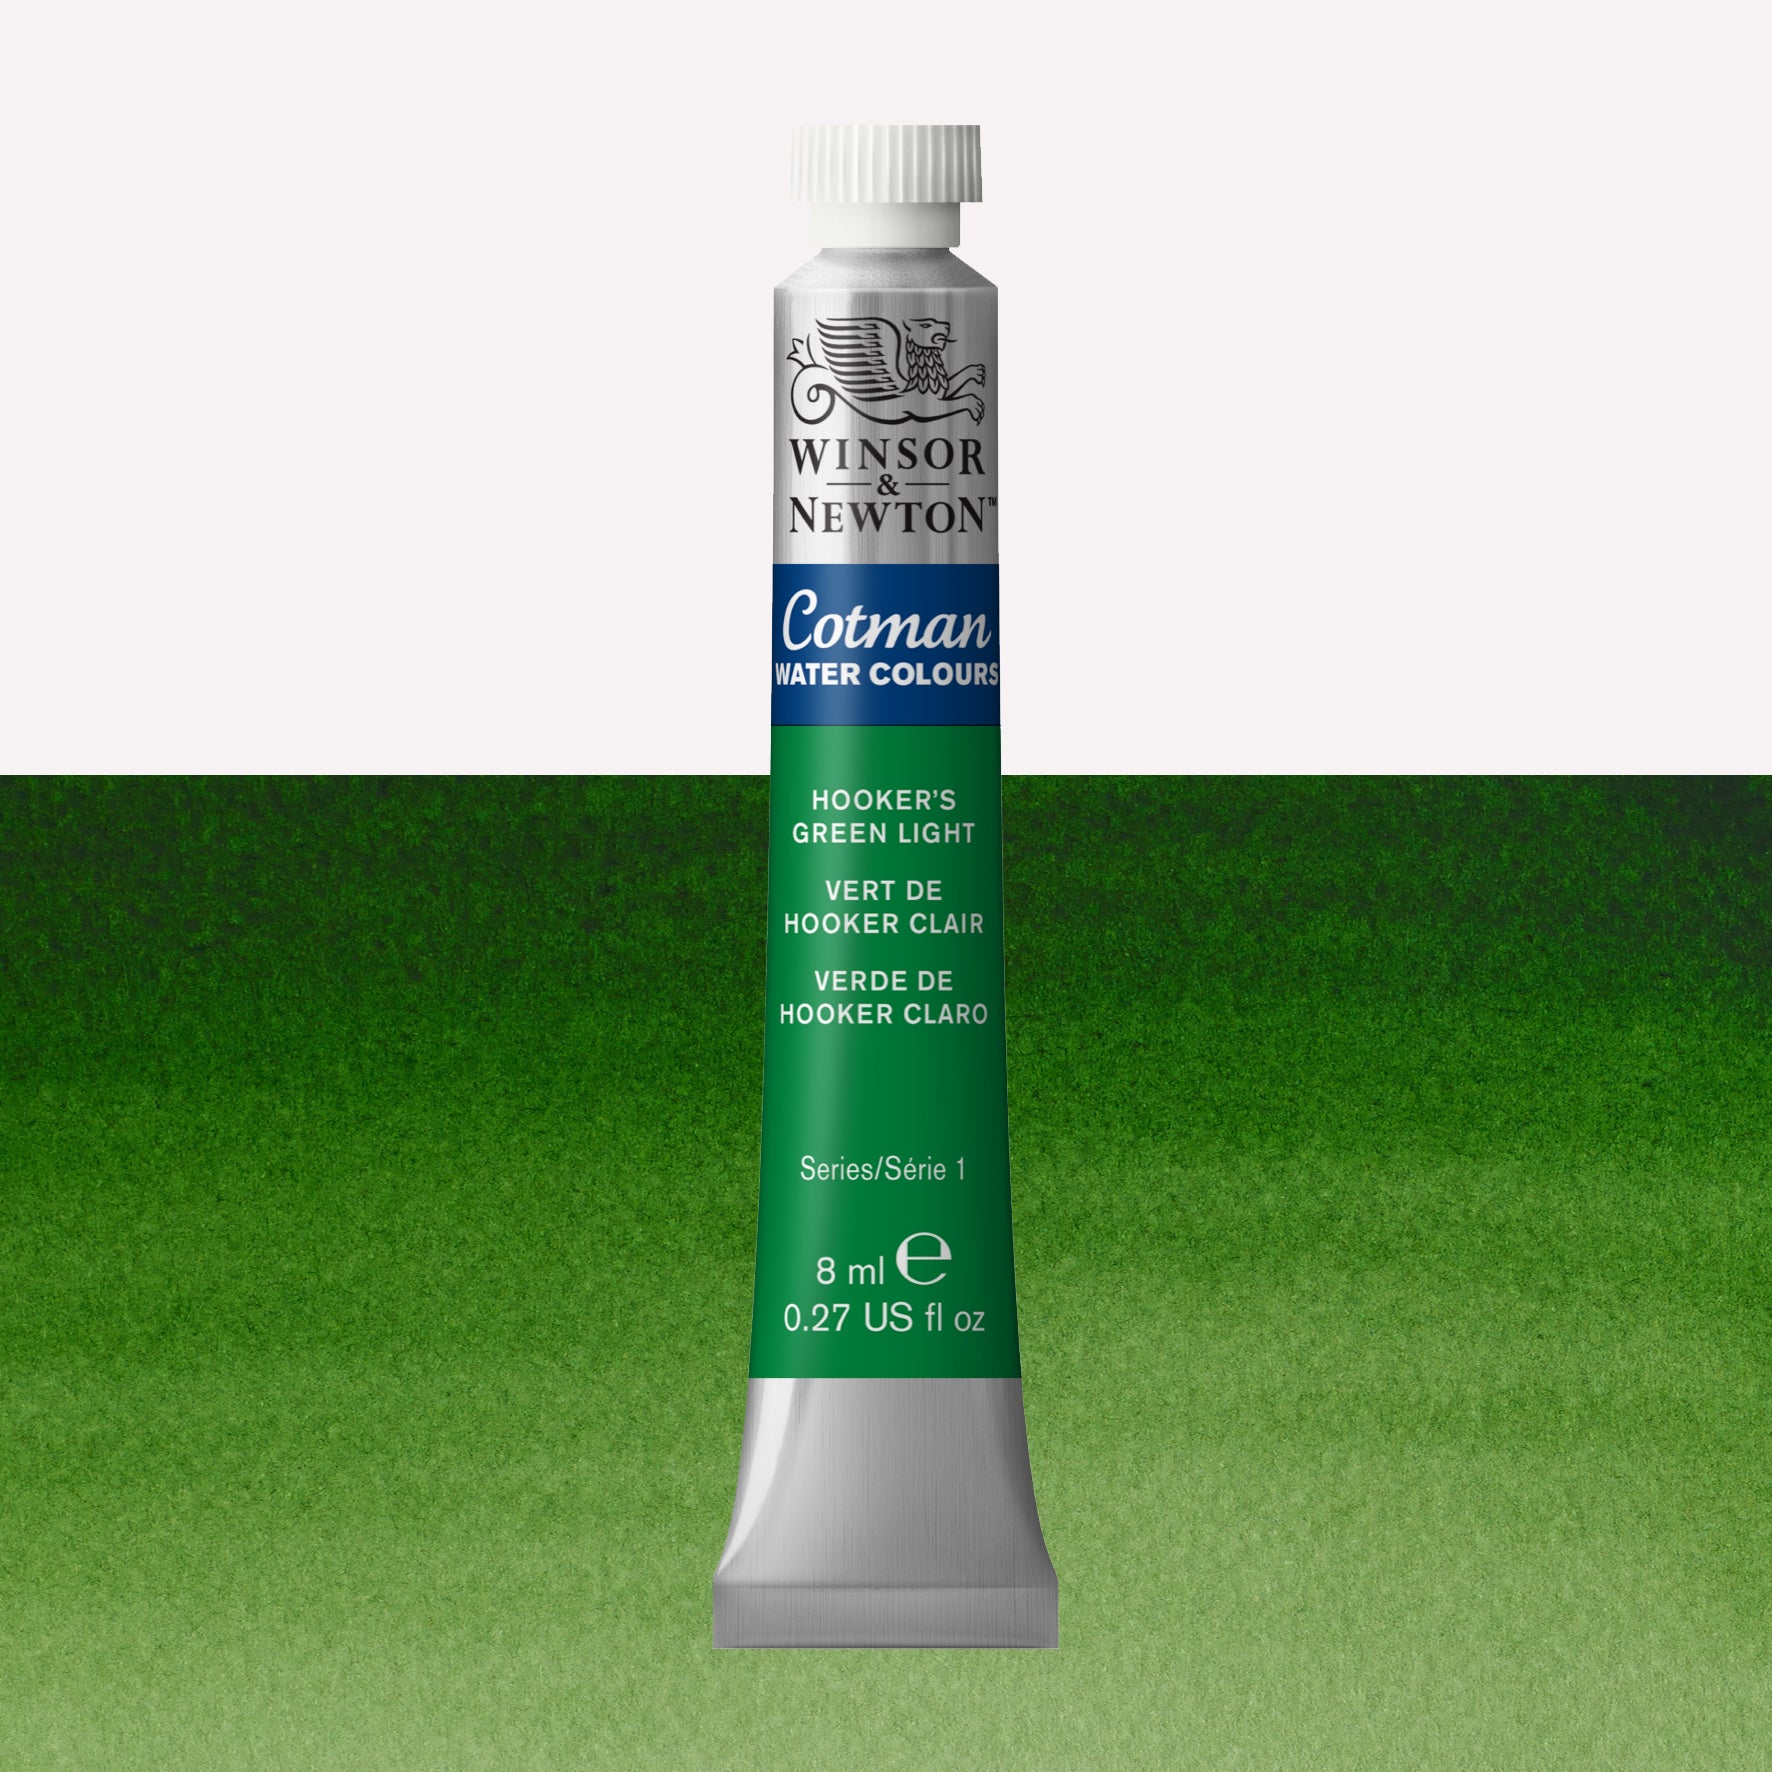 Winsor & Newton Cotman watercolour paint packaged in 8ml silver tube with a white lid in the shade Hooker’s Green Light over a highly pigmented colour swatch.